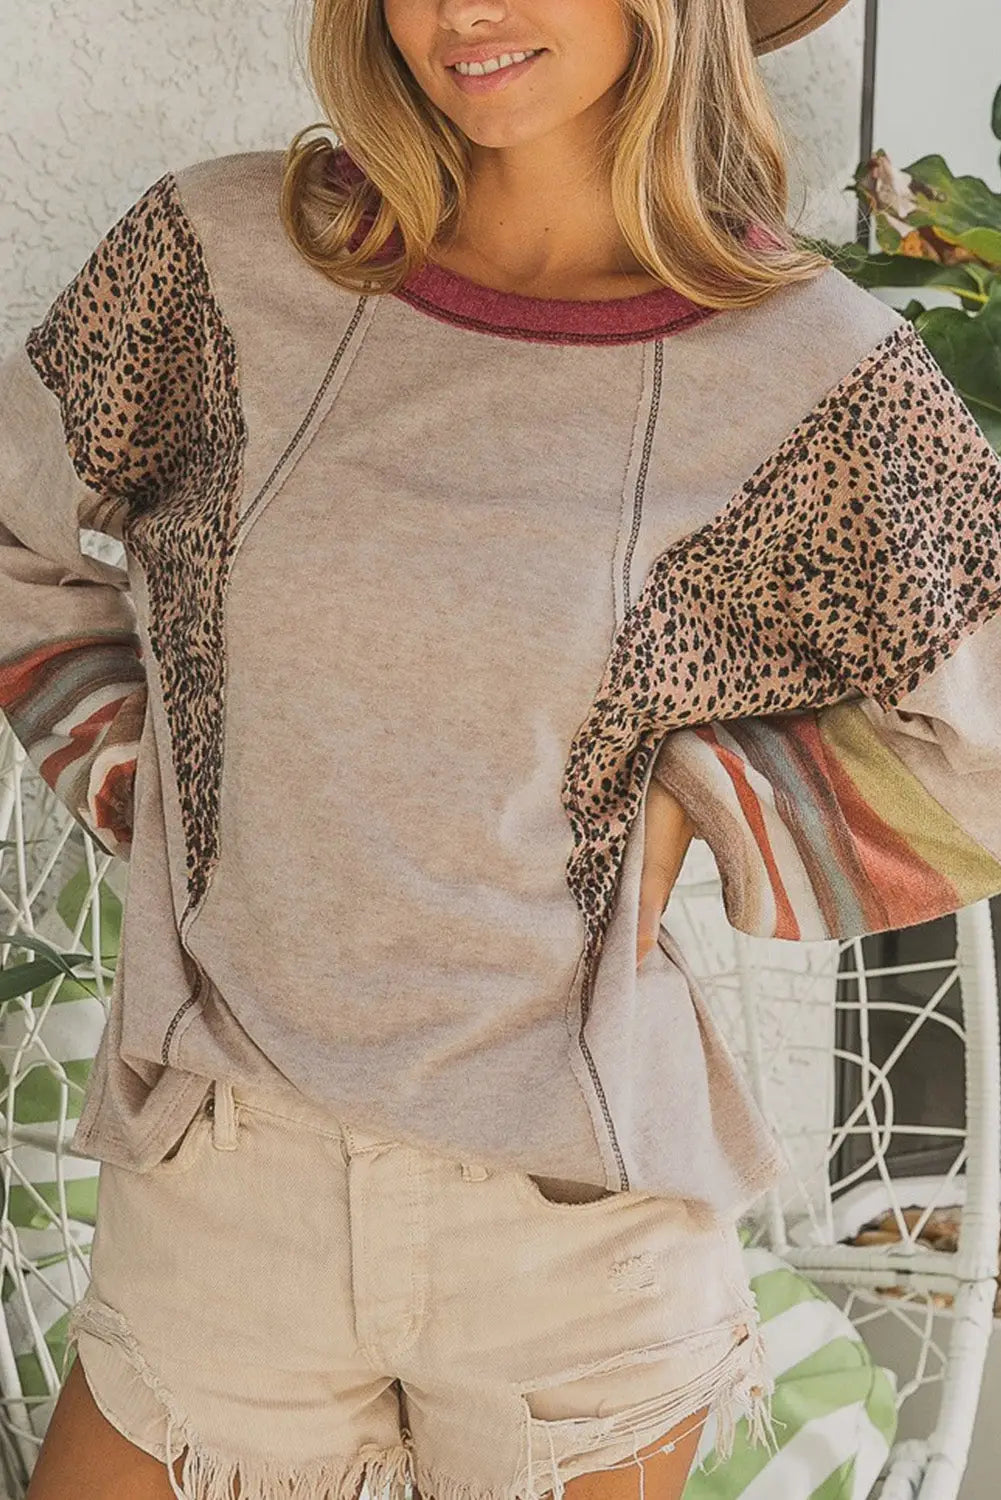 Khaki leopard serape patchwork exposed stitching pullover top - s / 60% polyester + 35% viscose + 5% elastane - tops